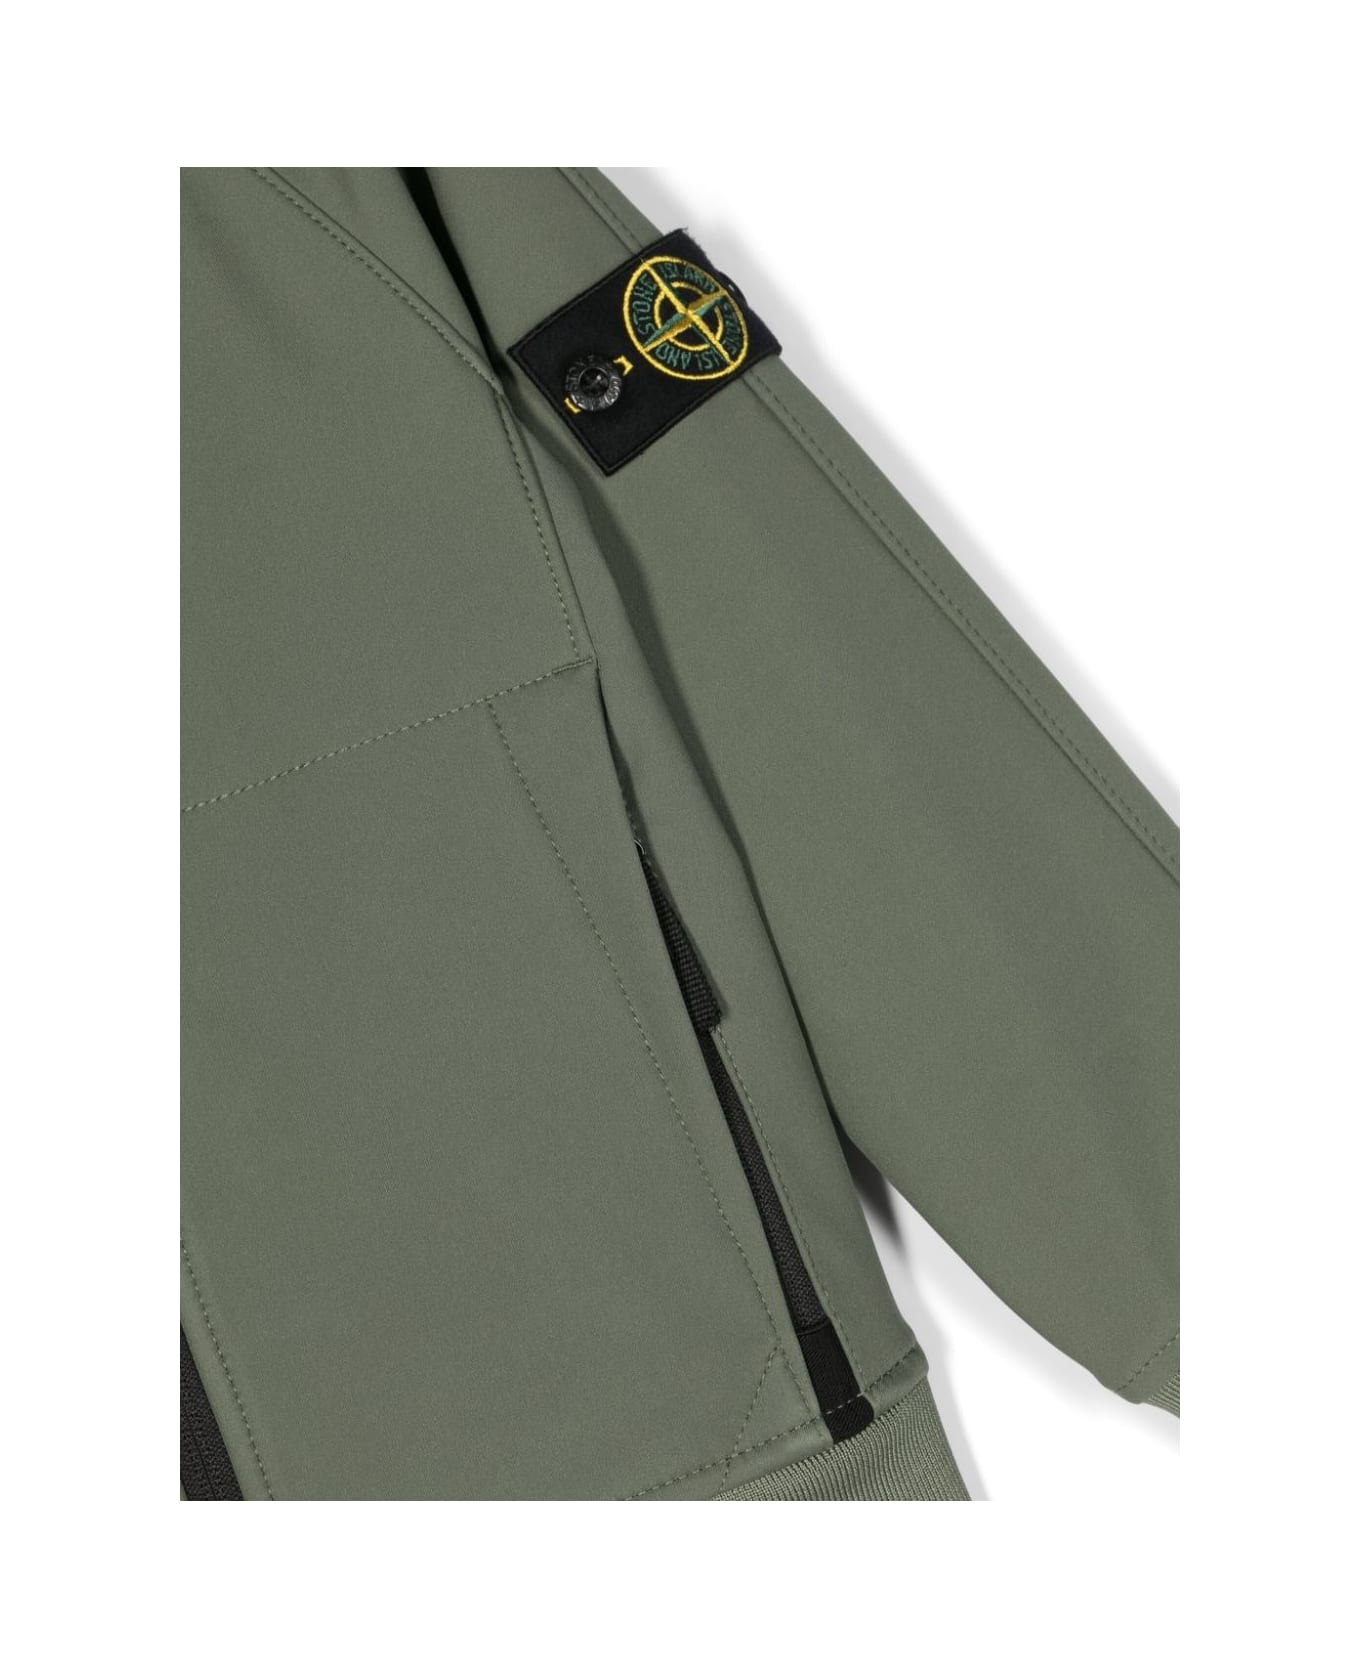 Stone Island Junior Green Light Soft Shell-r E.dye Jacket In Recycled Polyester - Green